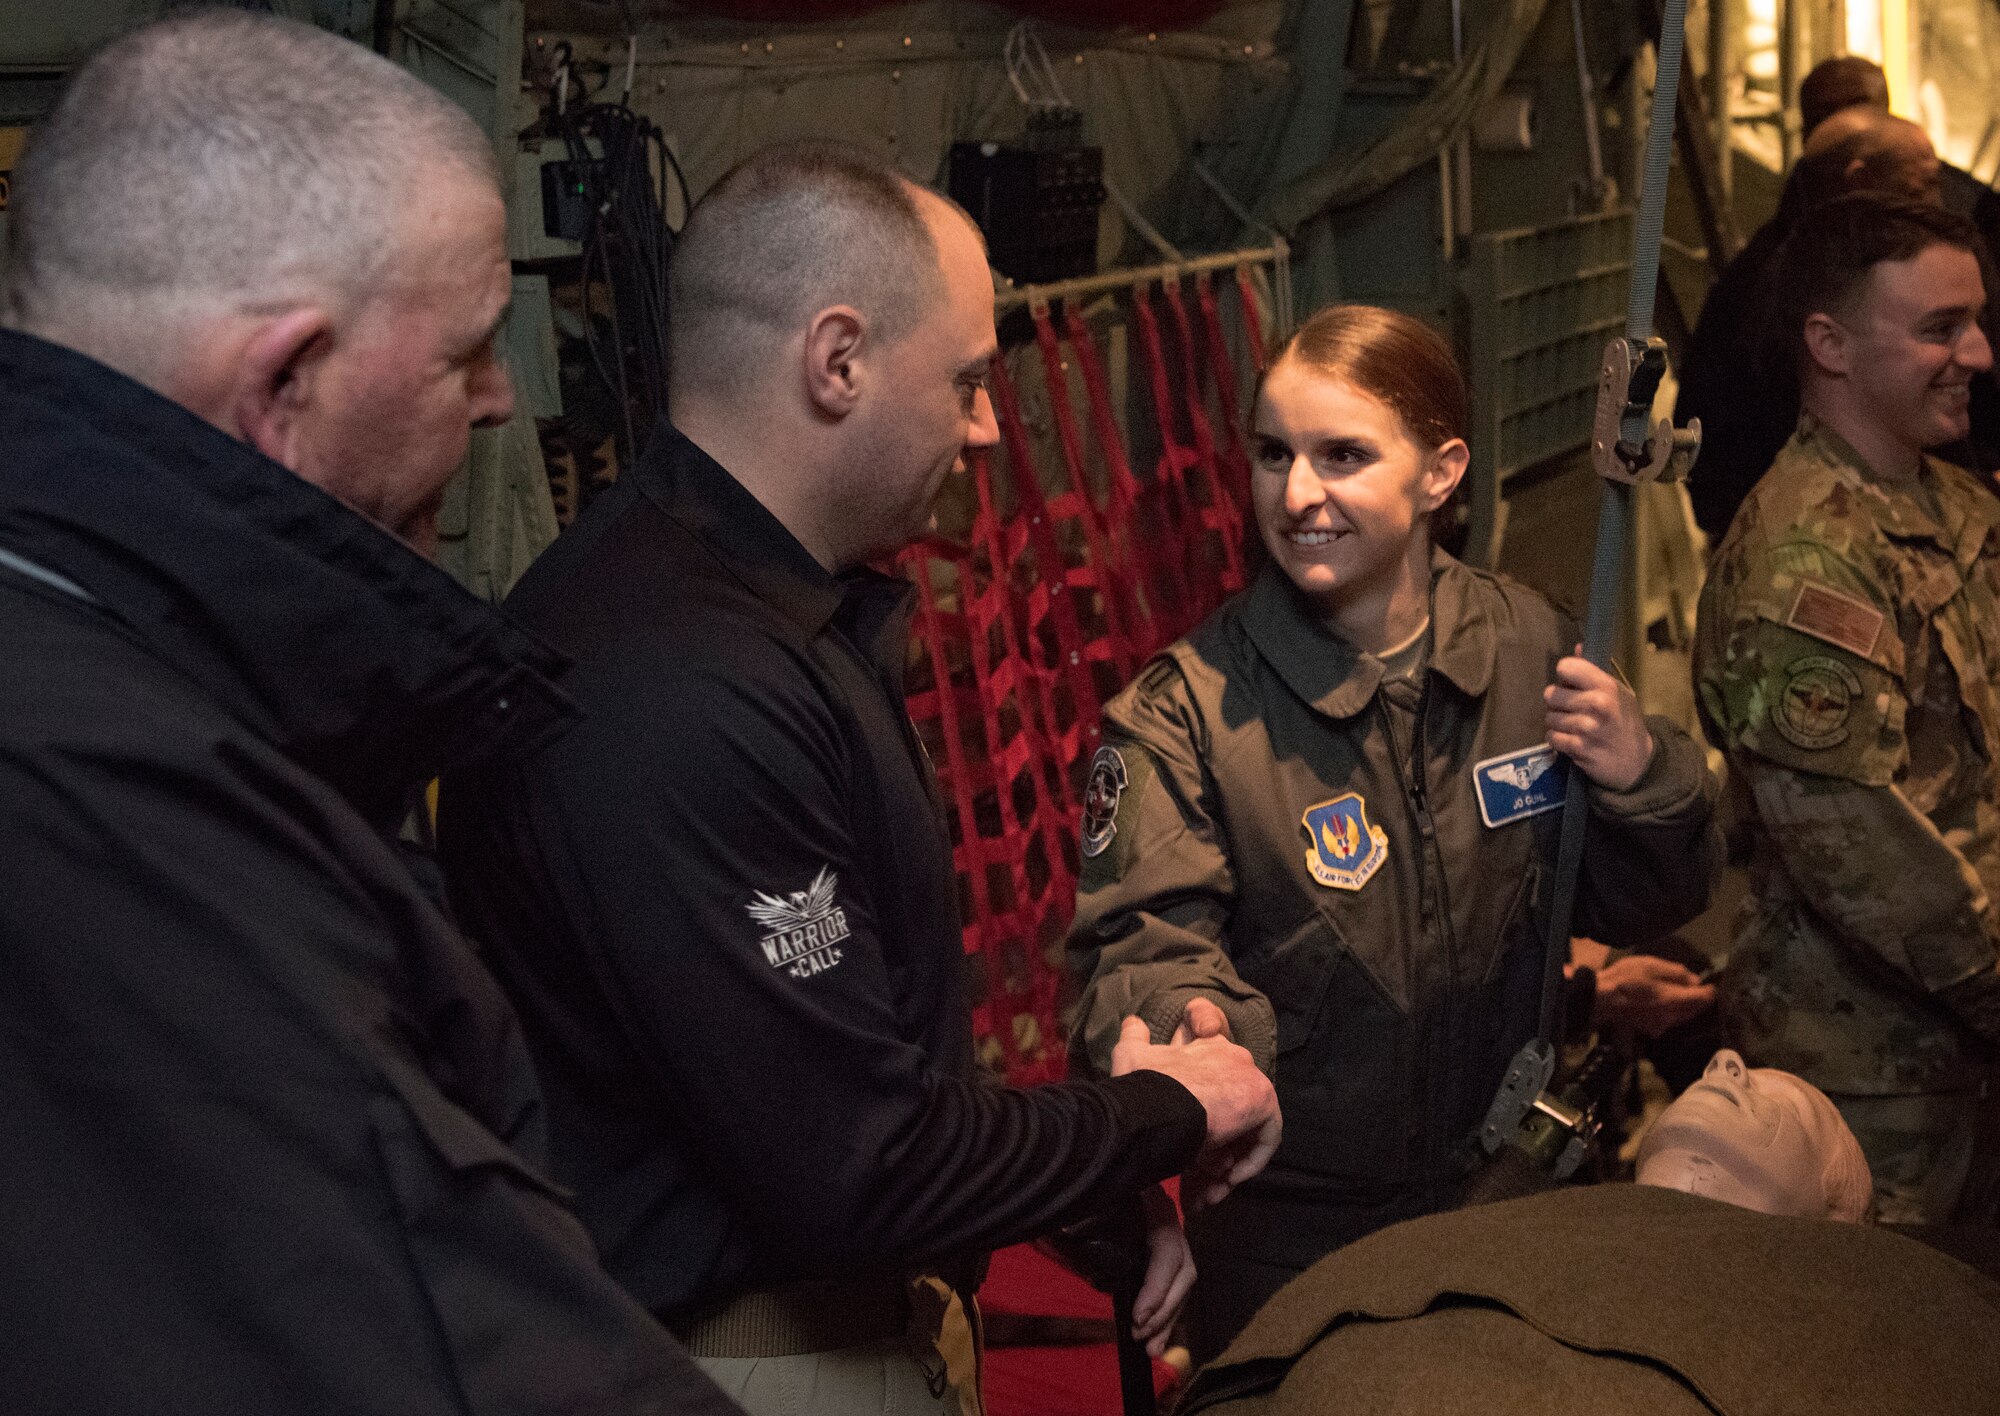 Retired U.S. Marine Corps Cpl. Matt Bradford, middle, a wounded warrior, meets U.S. Air Force Capt. Joanna Guhl, 86th Aeromedical Evacuation Squadron flight nurse, at Ramstein Air Base, Germany, Jan. 13, 2020. The OPE mission provides combat-wounded warriors the opportunity to gain closure as part of their recovery, while providing service members the opportunity to meet and learn from the veterans. Members of the 86th AES and 86th Aircraft Maintenance Squadron gave the wounded warriors a guided tour of a C-130J Super Hercules aircraft, like the ones used to medically evacuate the veterans years ago.